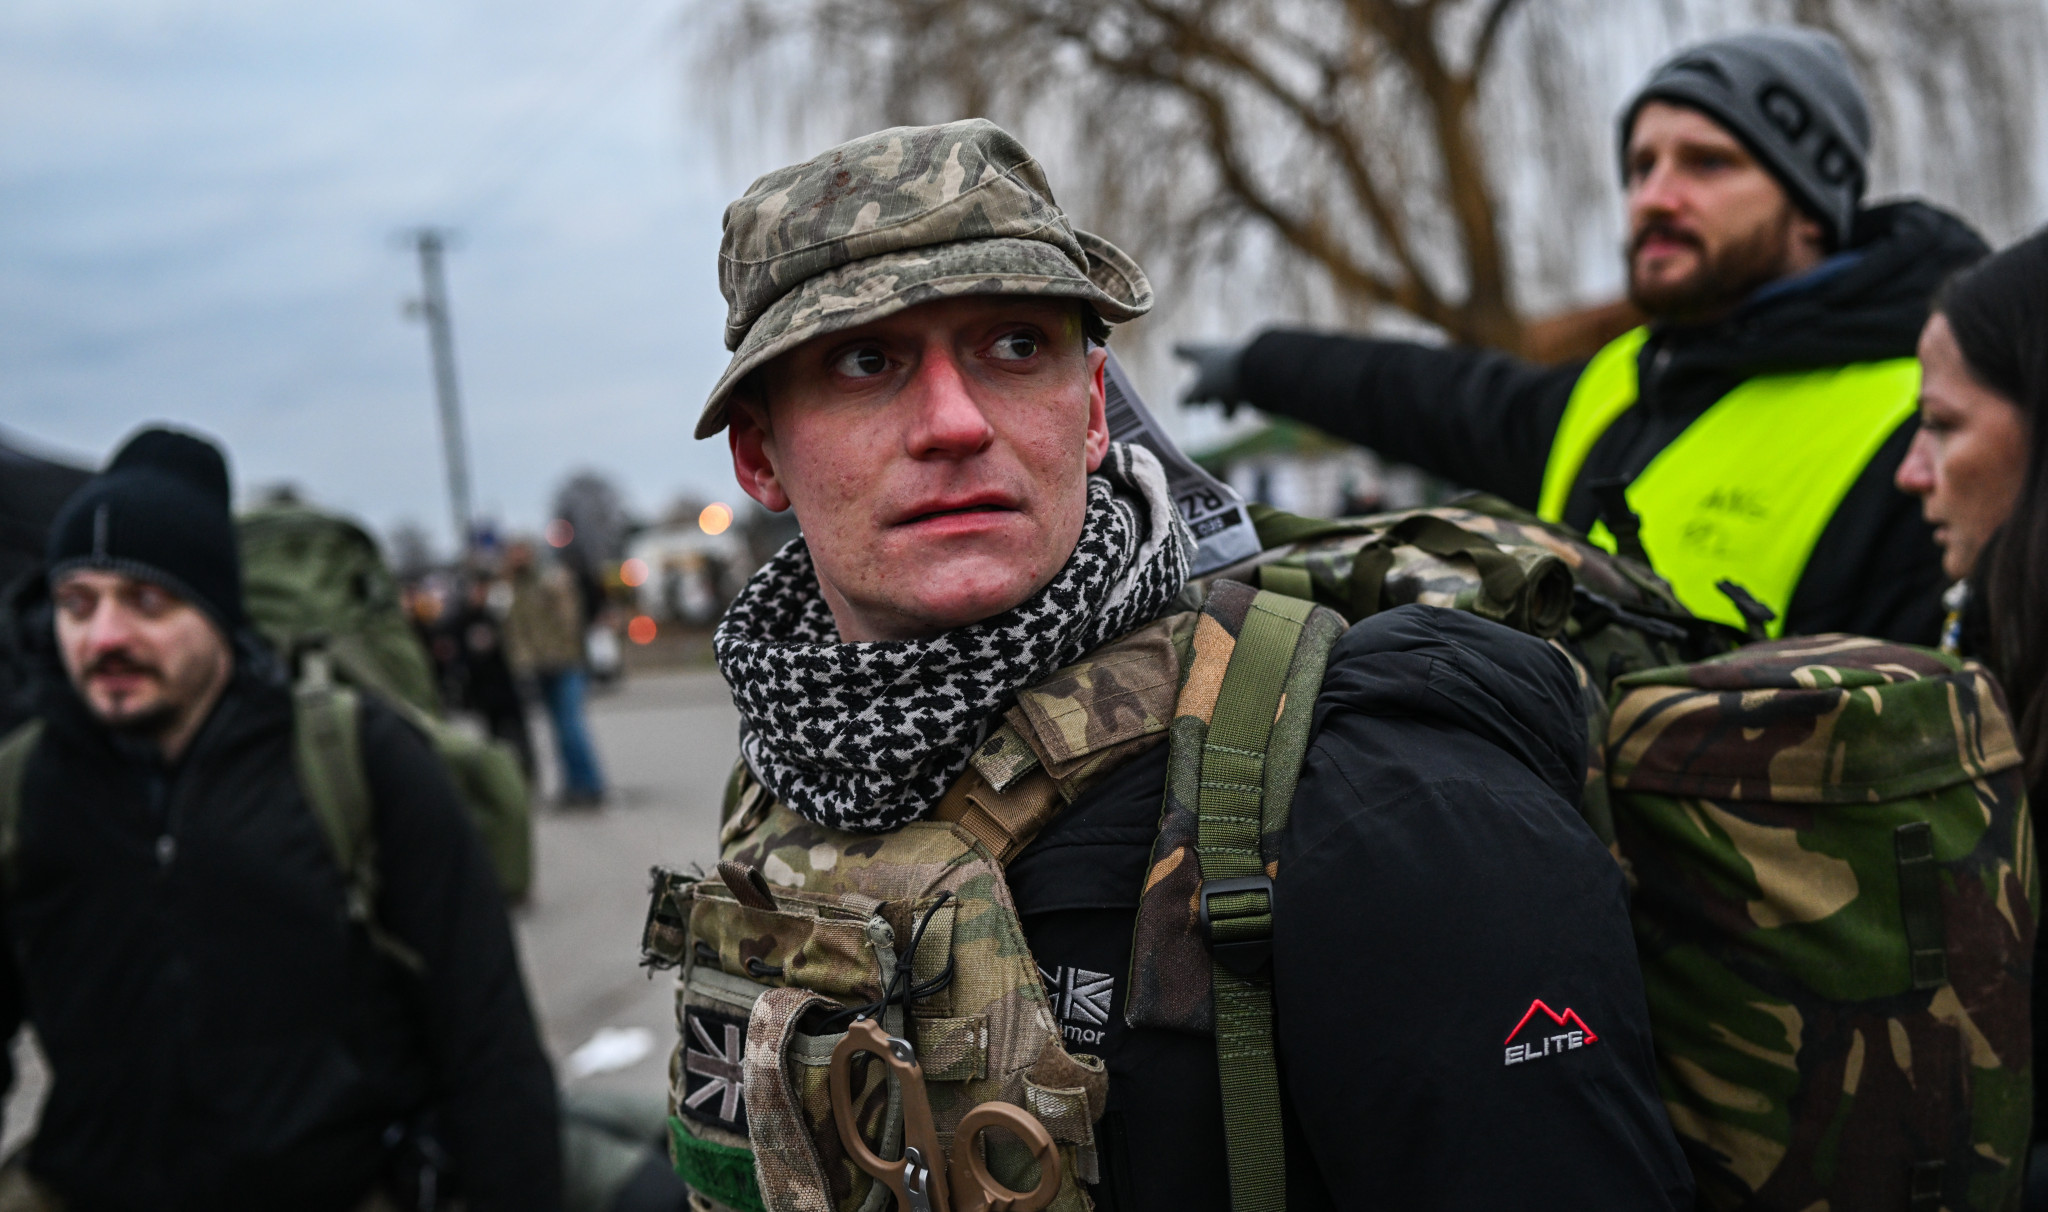 Alex, a British veteran who served in Afghanistan as a paramedic, waits to enter Ukraine via Medyka, Poland, on 6 March 2022. (Photo: Omar Marques / Getty)